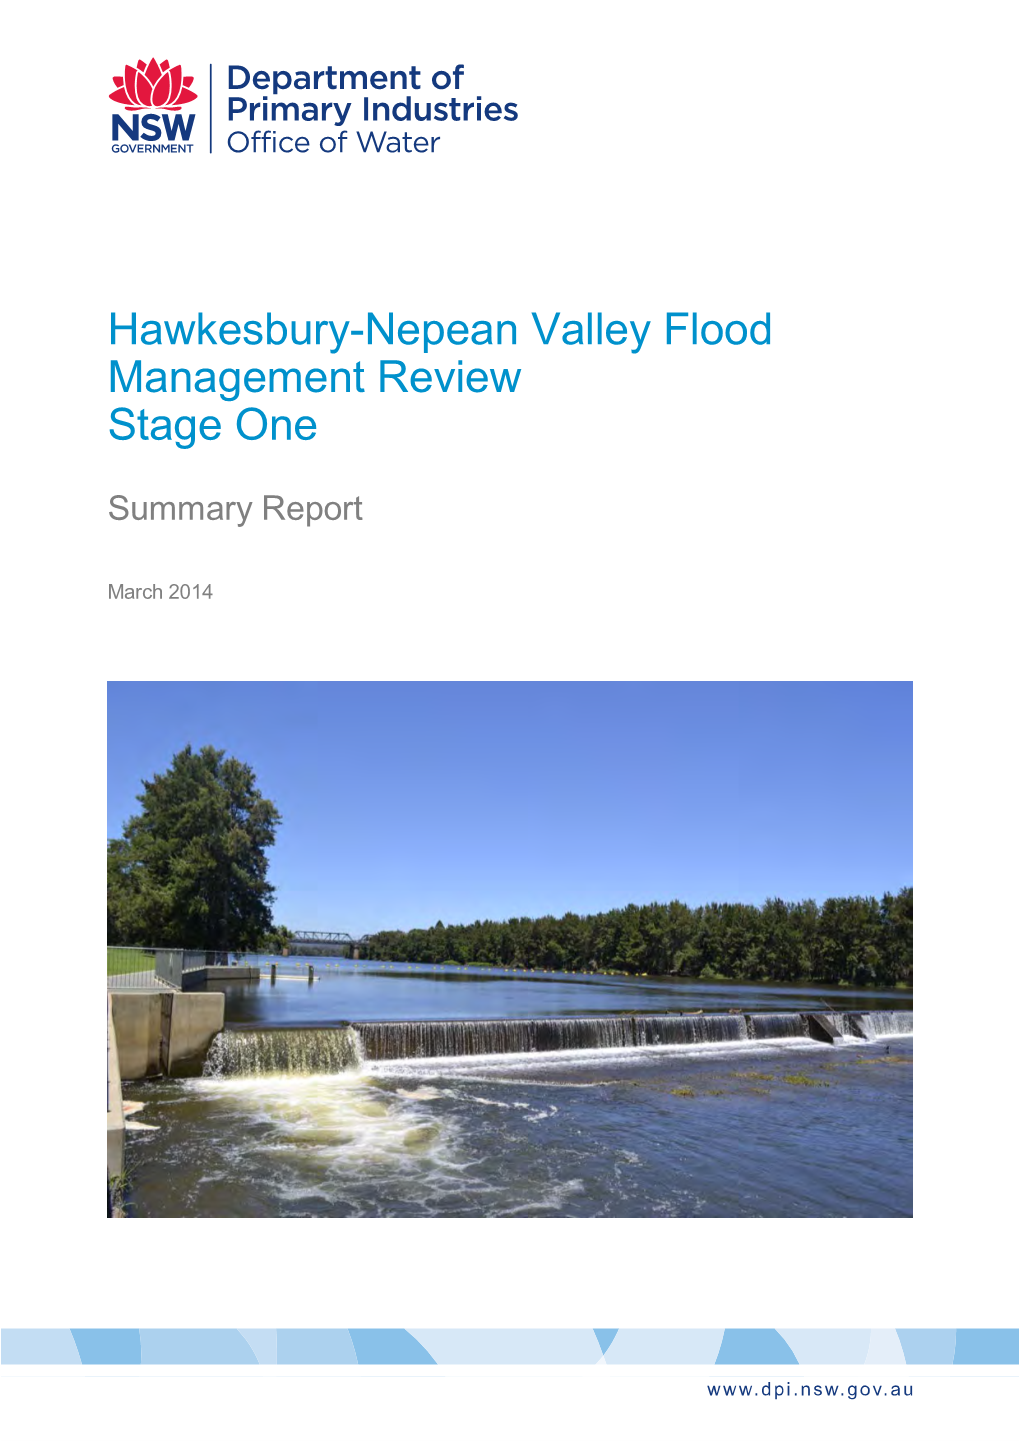 Hawkesbury-Nepean Valley Flood Management Review Stage One